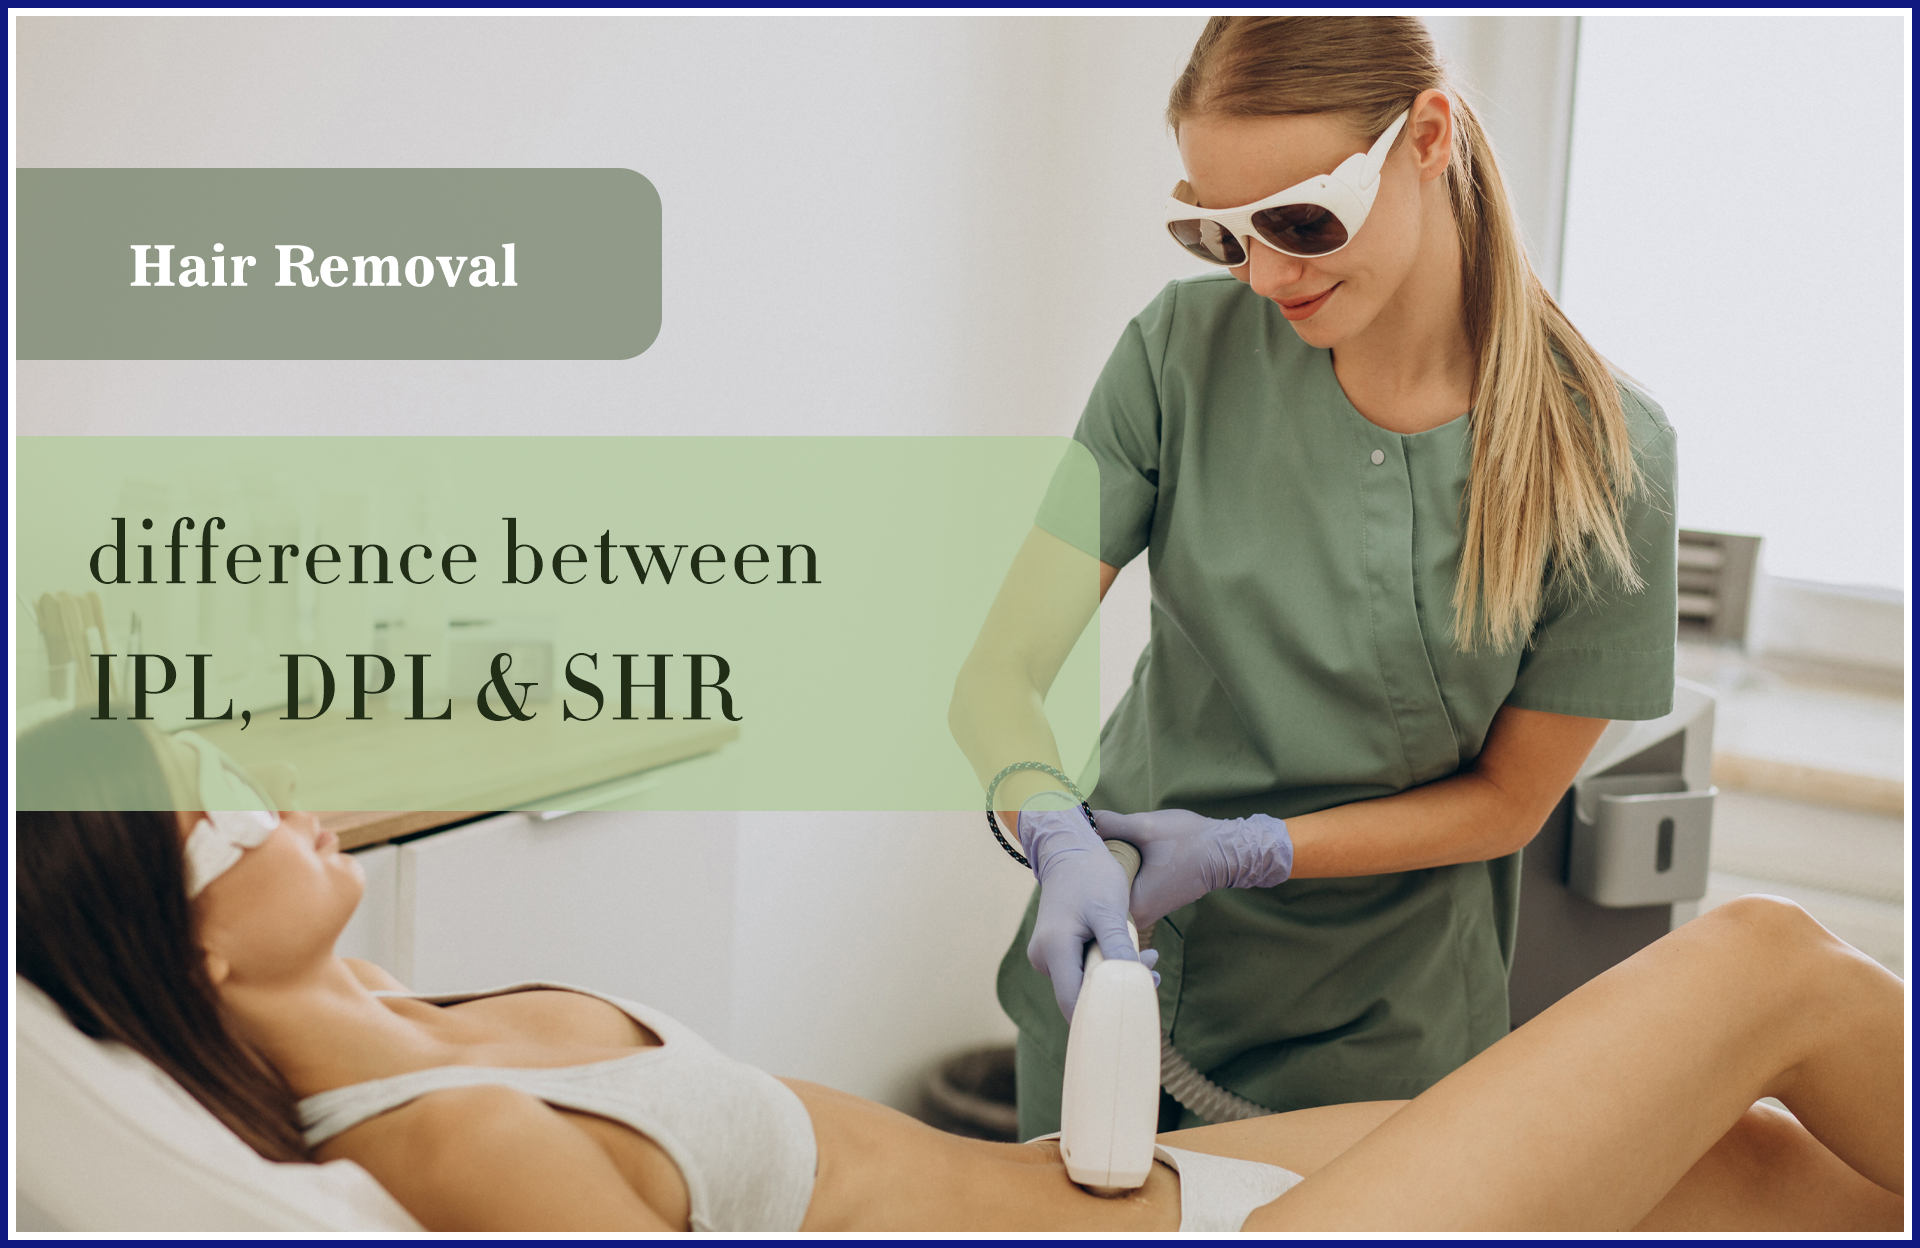 Learn Differences Between IPL, DPL & SHR Hair Removal